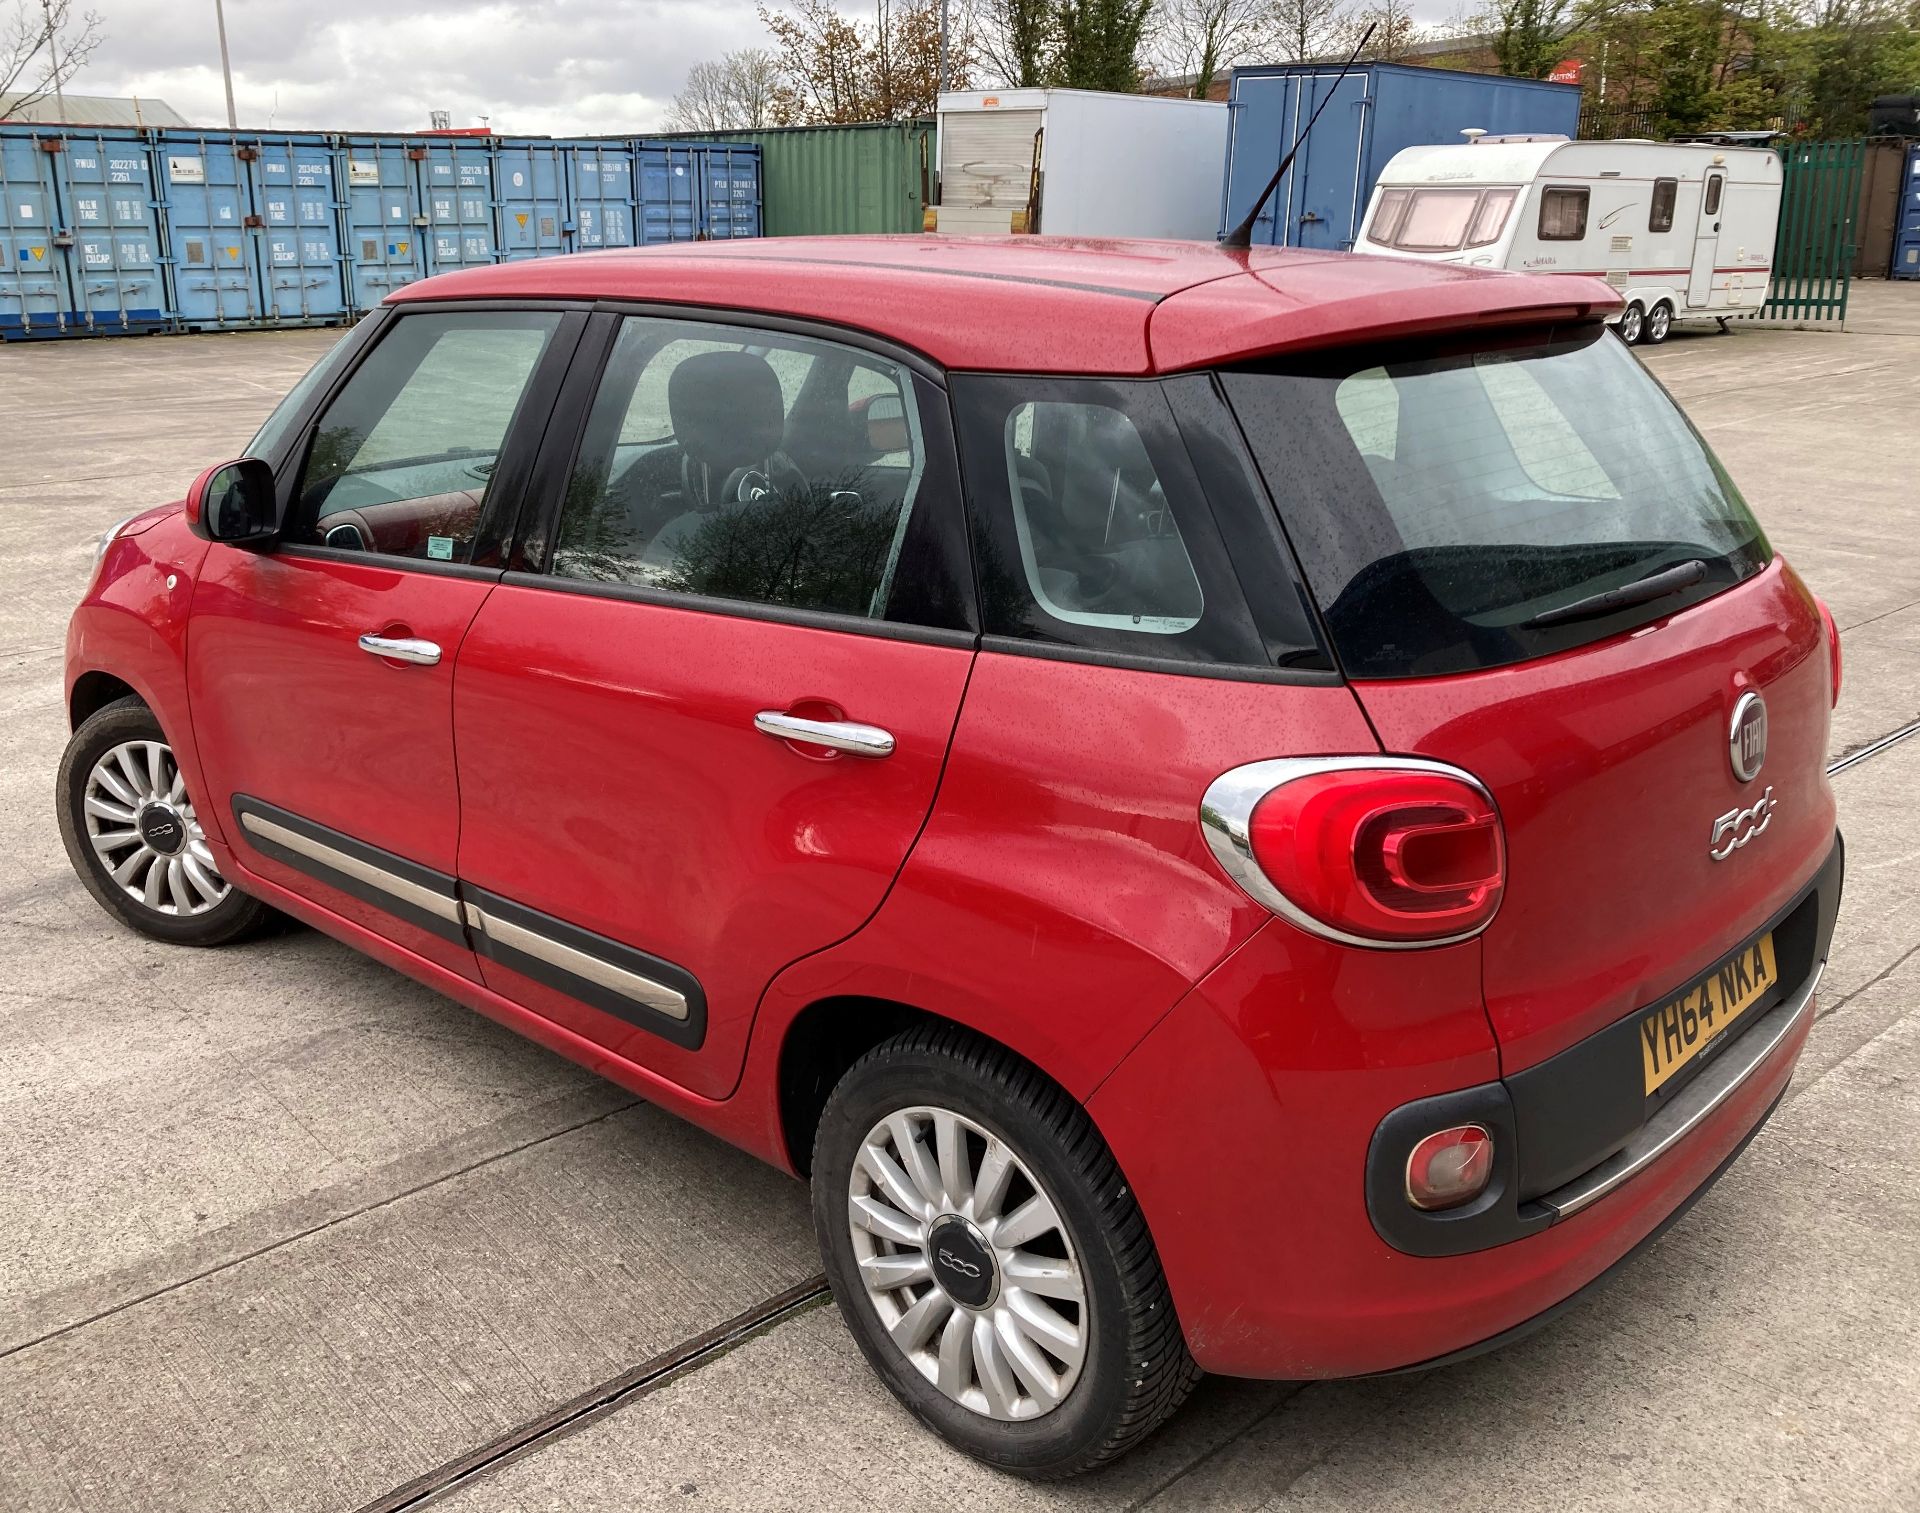 FIAT 500L POP STAR MULTI-JET 1.2 MPV - DIESEL - RED. On the instructions of: A retained client. - Image 7 of 16